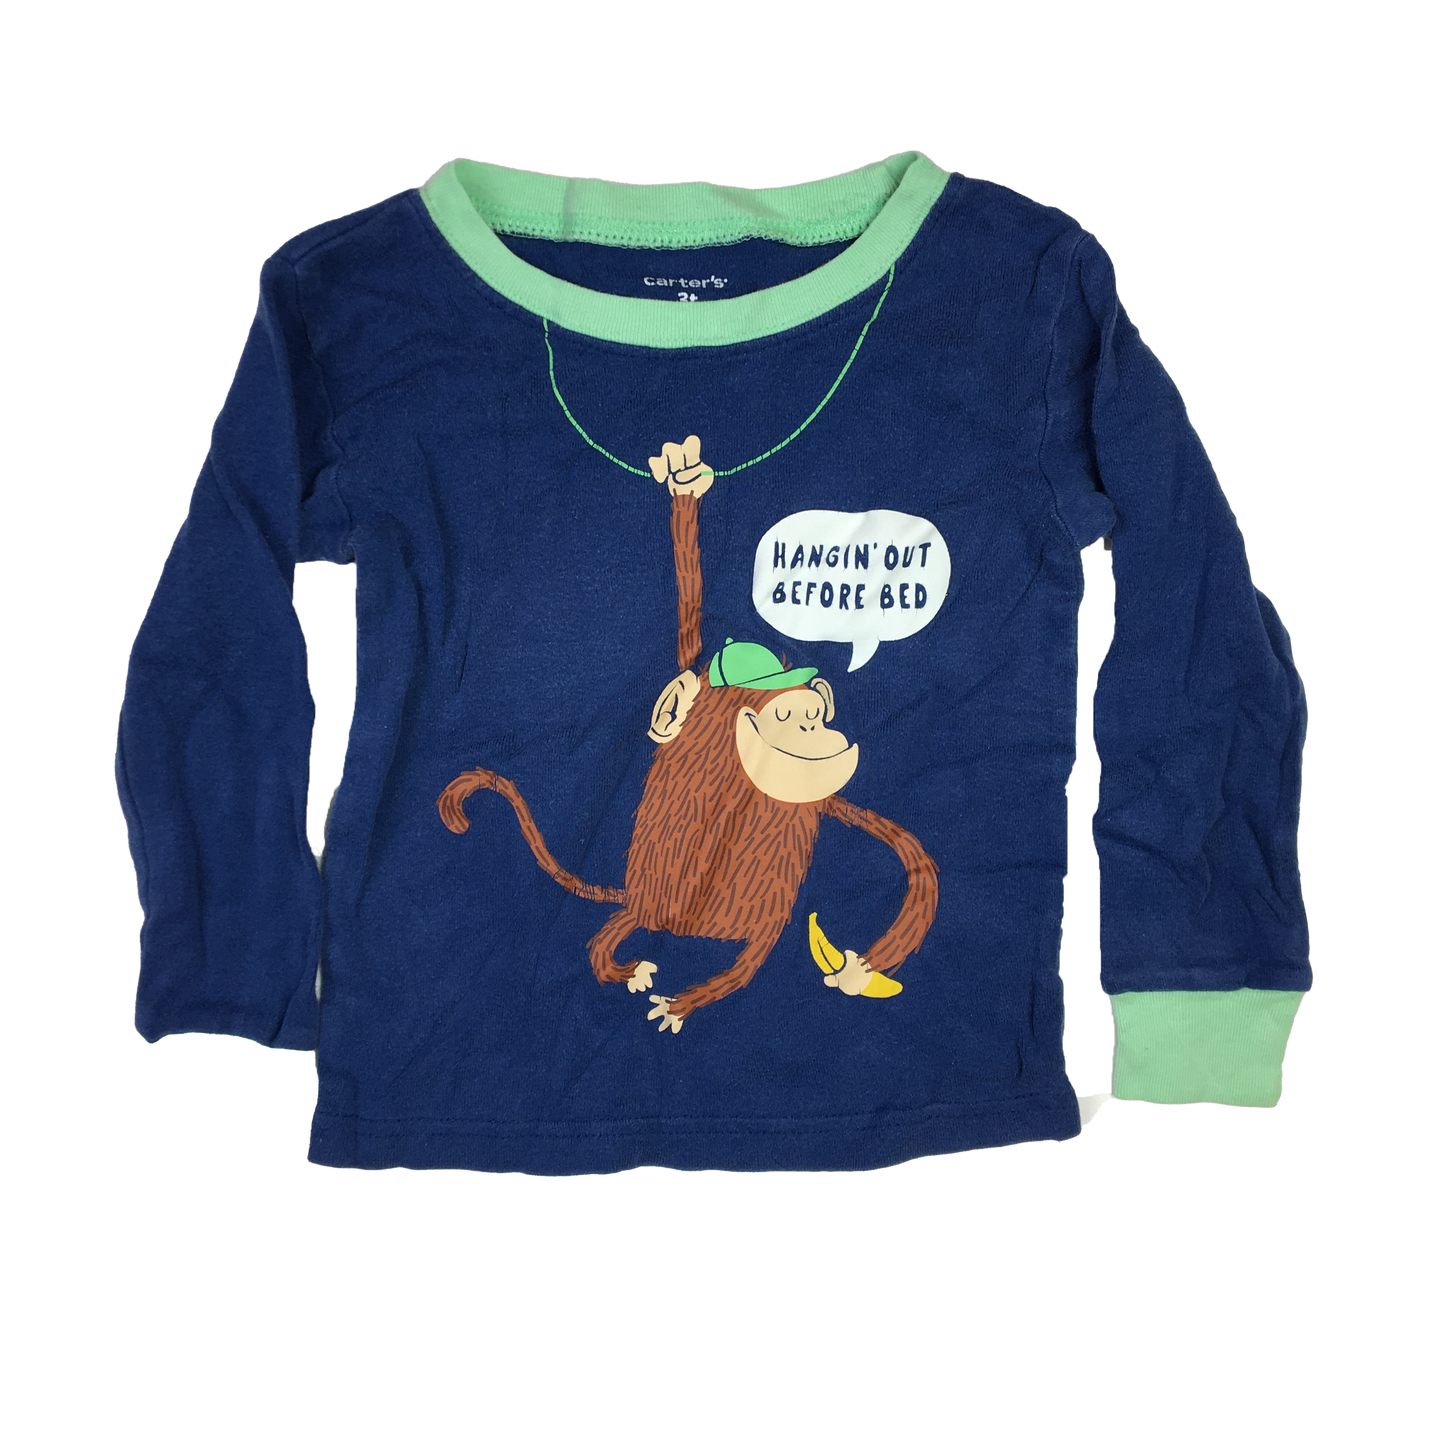 Carter's Navy PJ Top with Monkey 3T